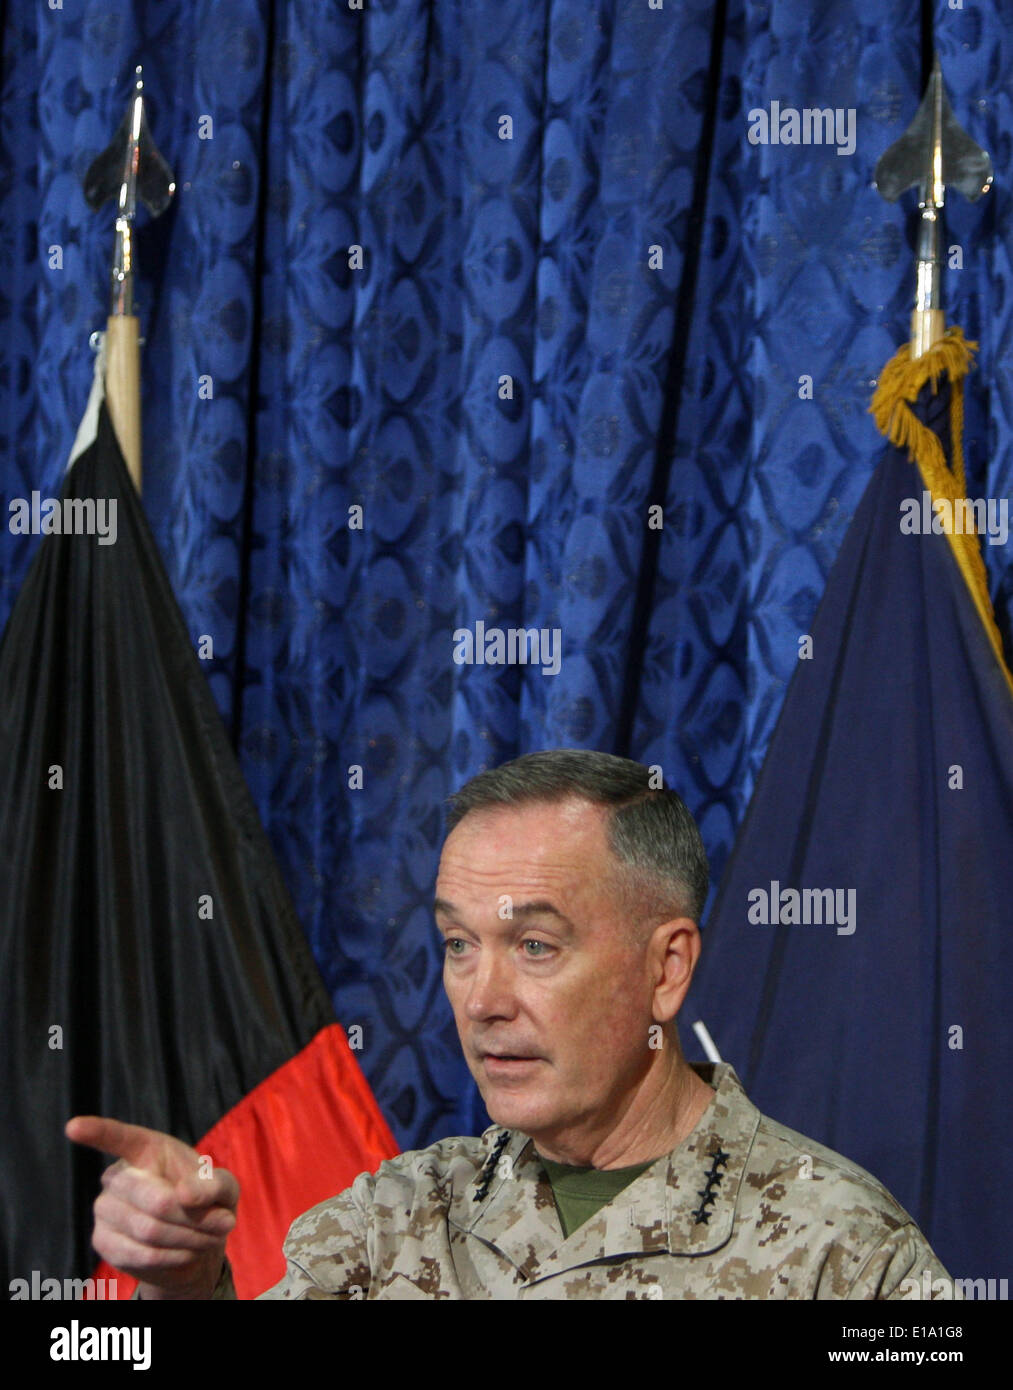 Kabul, Afghanistan. 28th May, 2014. Top U.S. Commander in Afghanistan General Joseph F. Dunford, Jr. attends a press conference in Kabul, Afghanistan, May 28, 2014. Joseph F. Dunford, Jr. on Wednesday reaffirmed his country's commitment to Afghans. Credit:  Ahmad Massoud/Xinhua/Alamy Live News Stock Photo